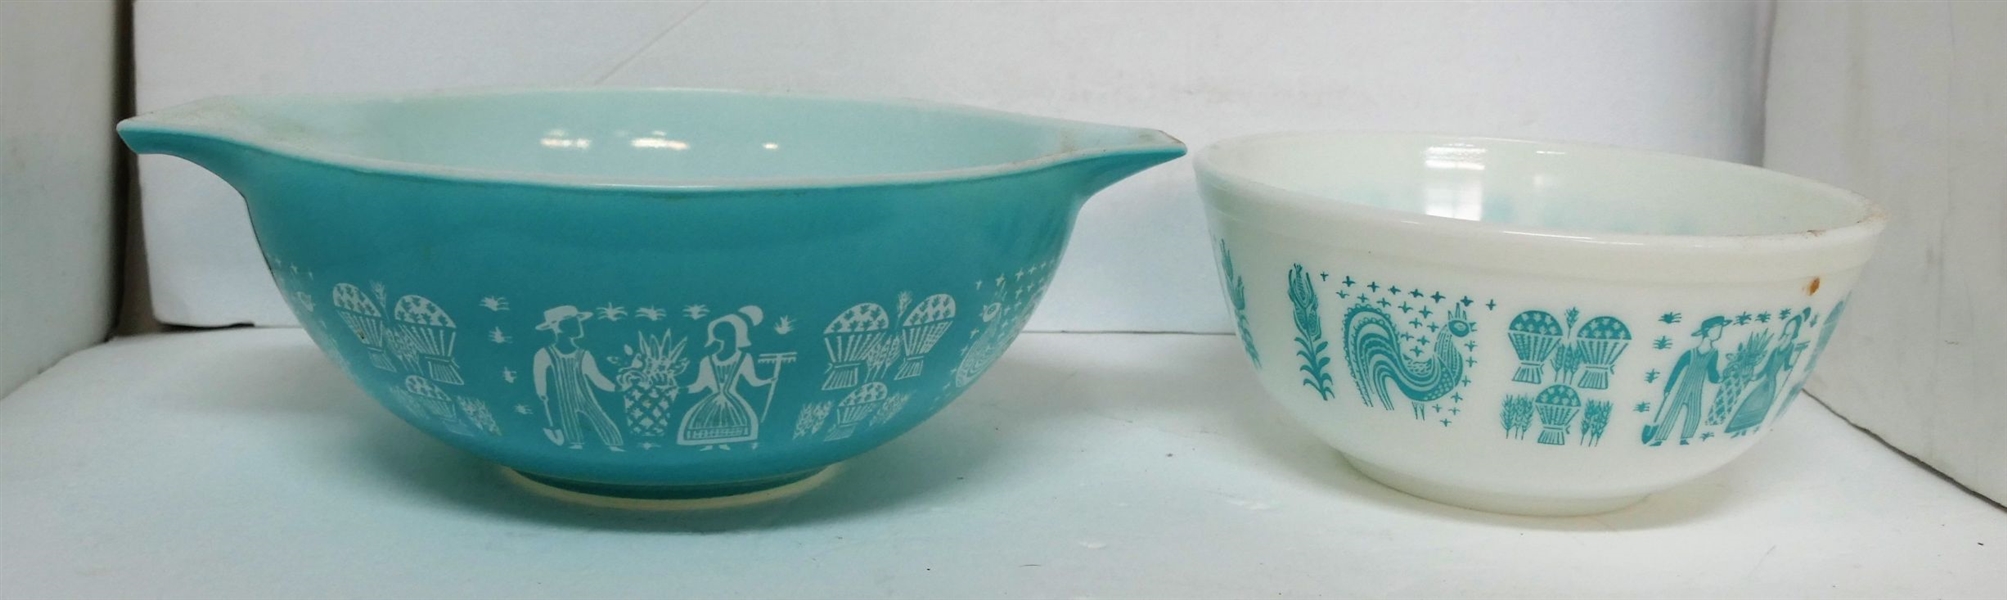 2 Pyrex Mixing Bowls - Teal Dutch Pattern Largest Measures 13 inches Handle to Handle